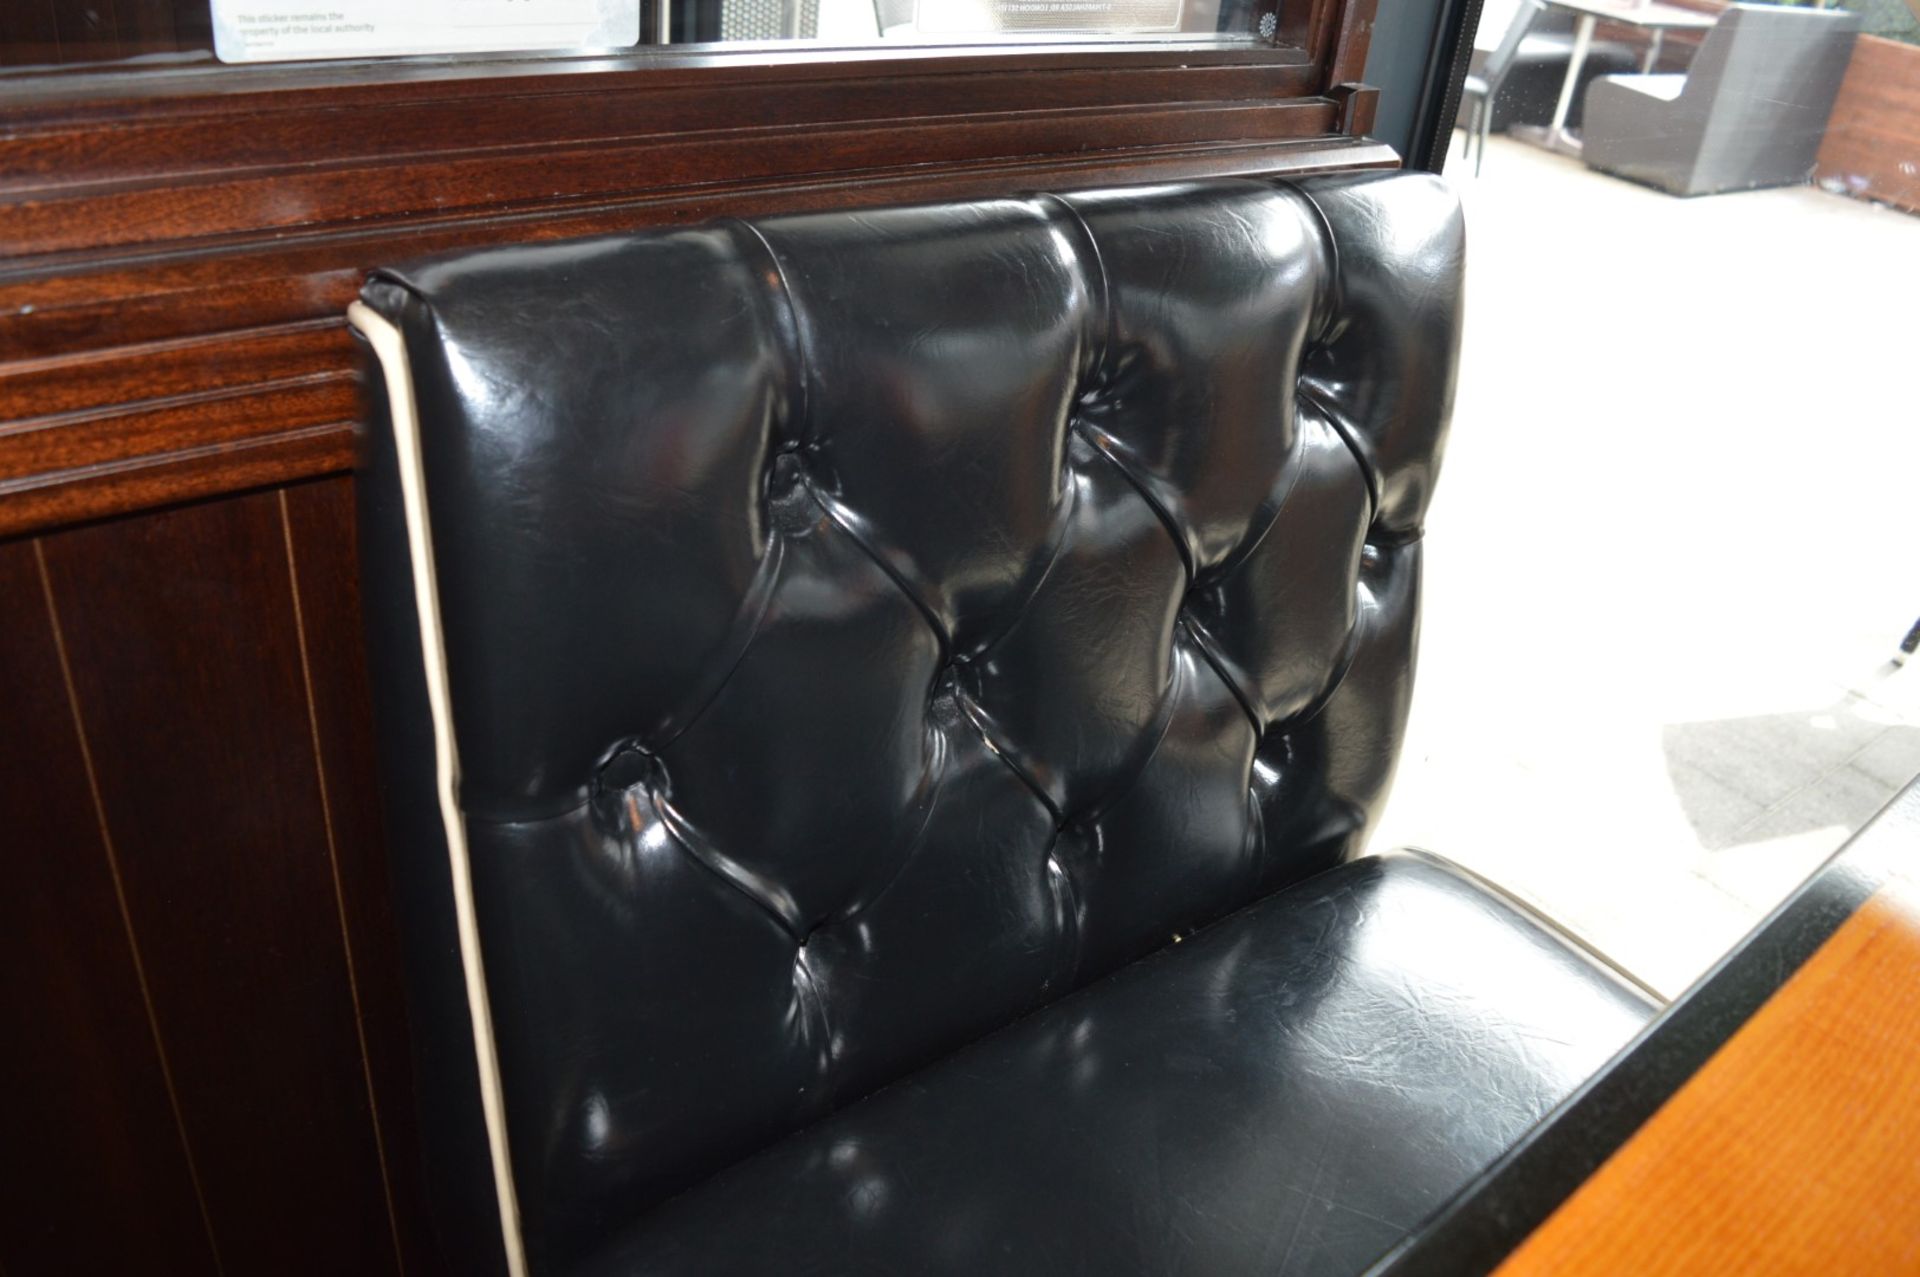 3 x Sections of Restaurant / Cafe Booth Seating With Two Poser Tables - Black Faux Leather - Image 8 of 17